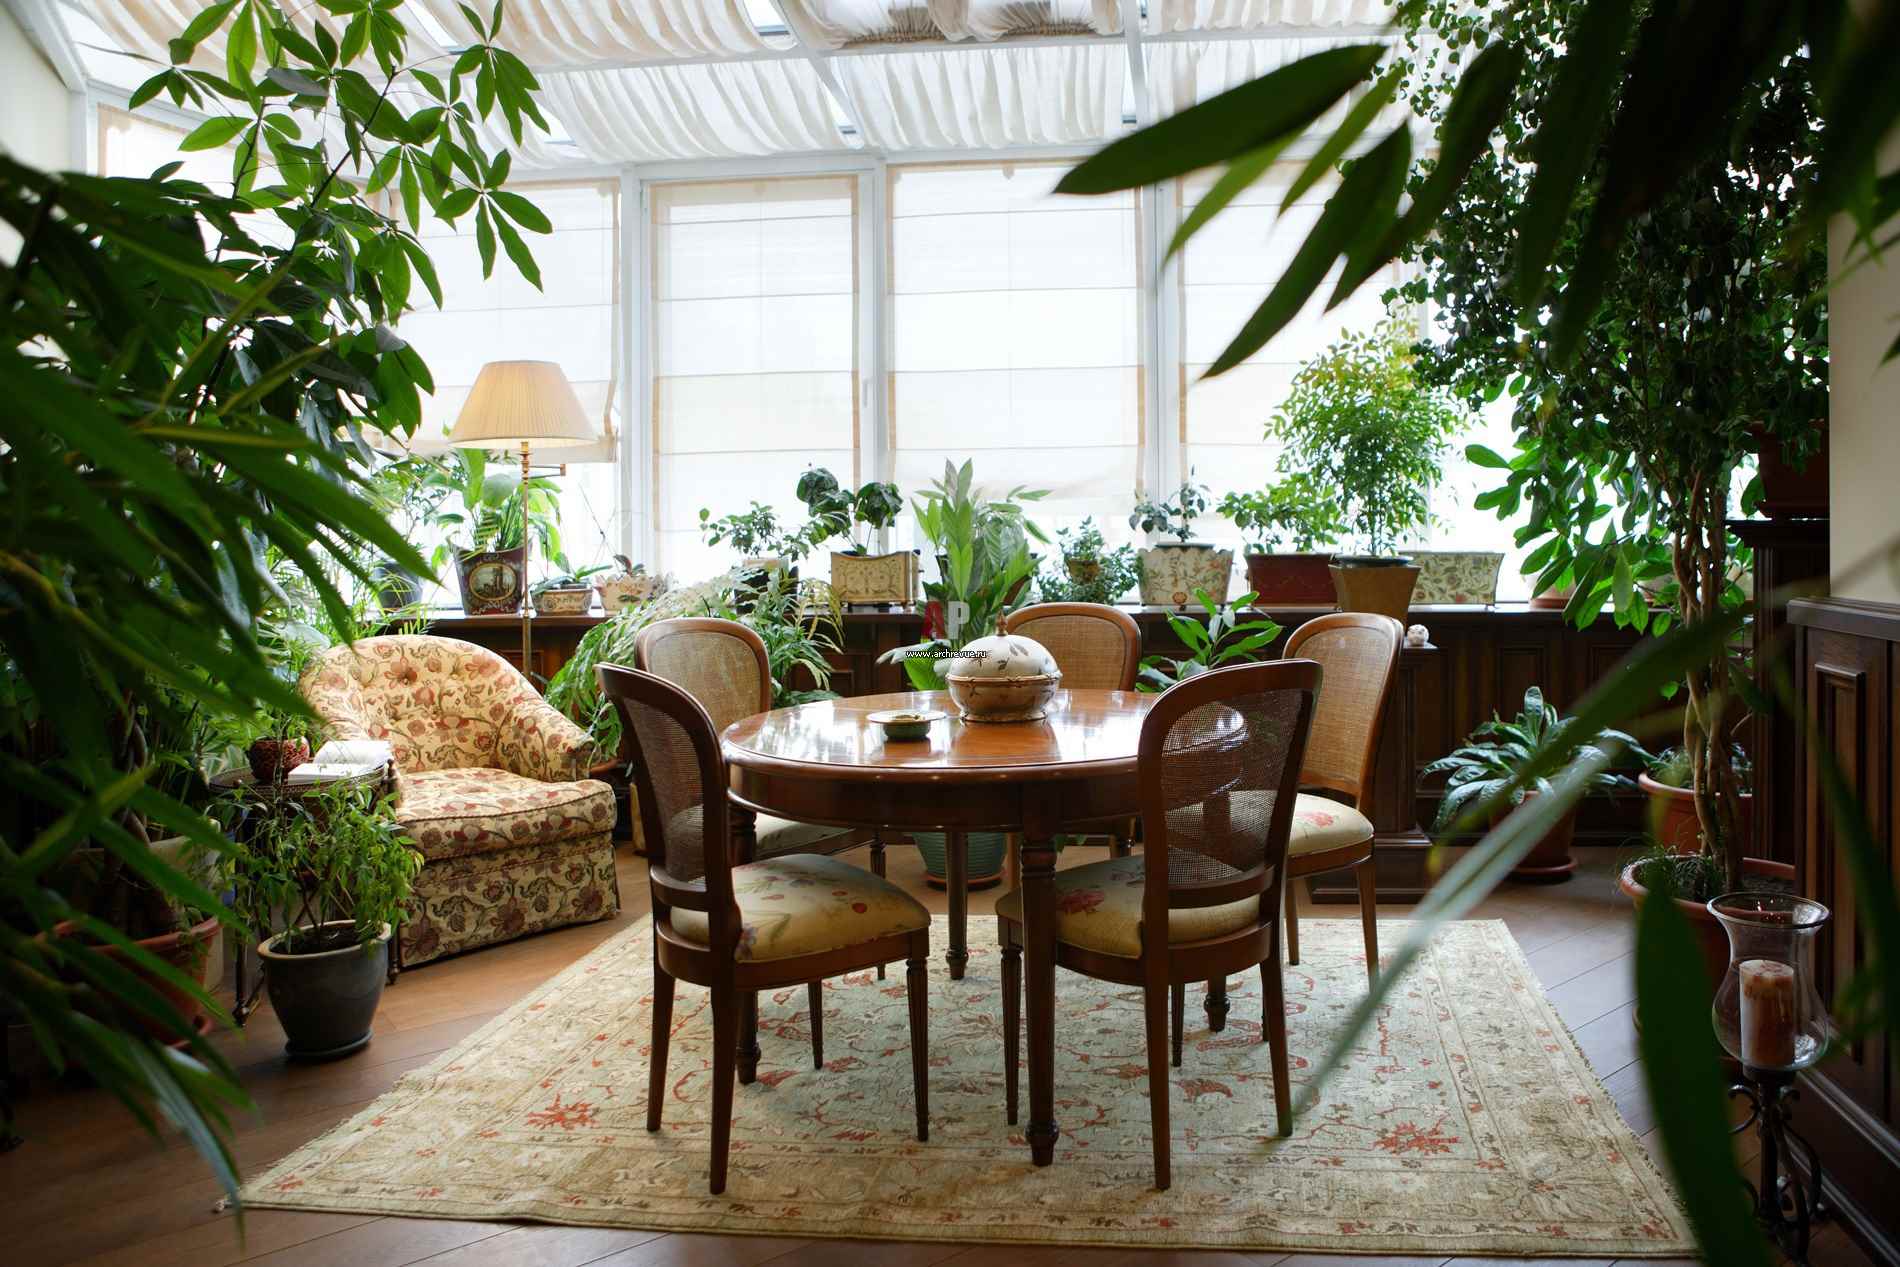 the idea of ​​applying bright ideas for decorating a winter garden in a house